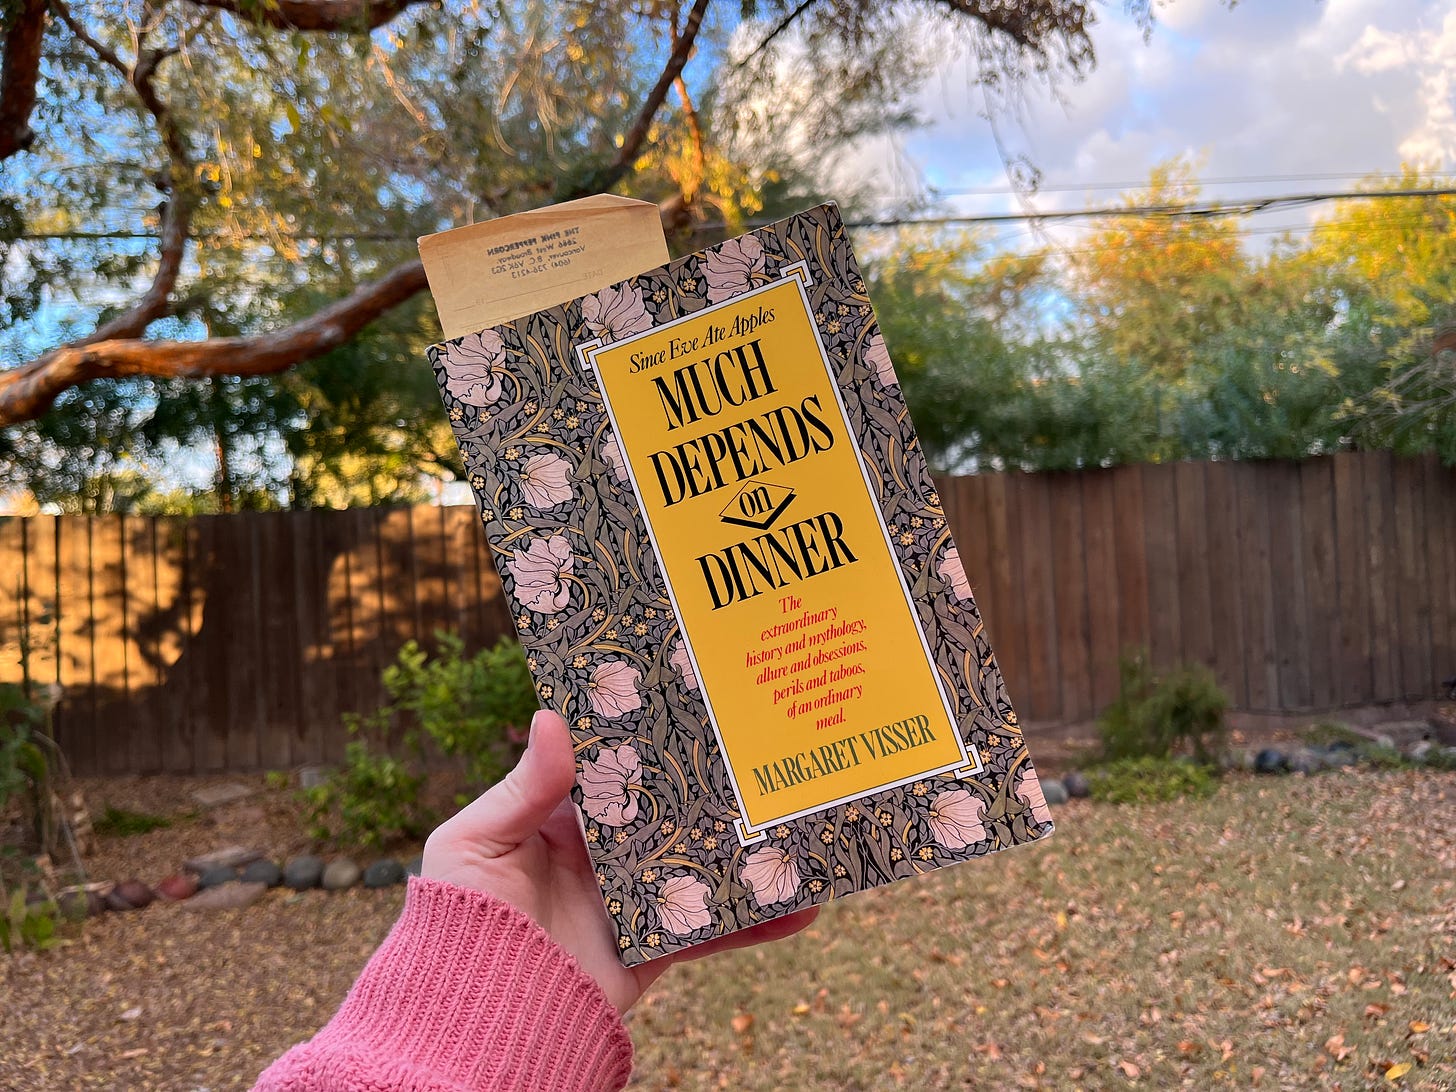 my left hand holding a copy of Much Depends on Dinner: The extraordinary history and mythology, allure and obsessions, perils and taboos, of an ordinary meal (1986) by Margaret Visser in my backyard